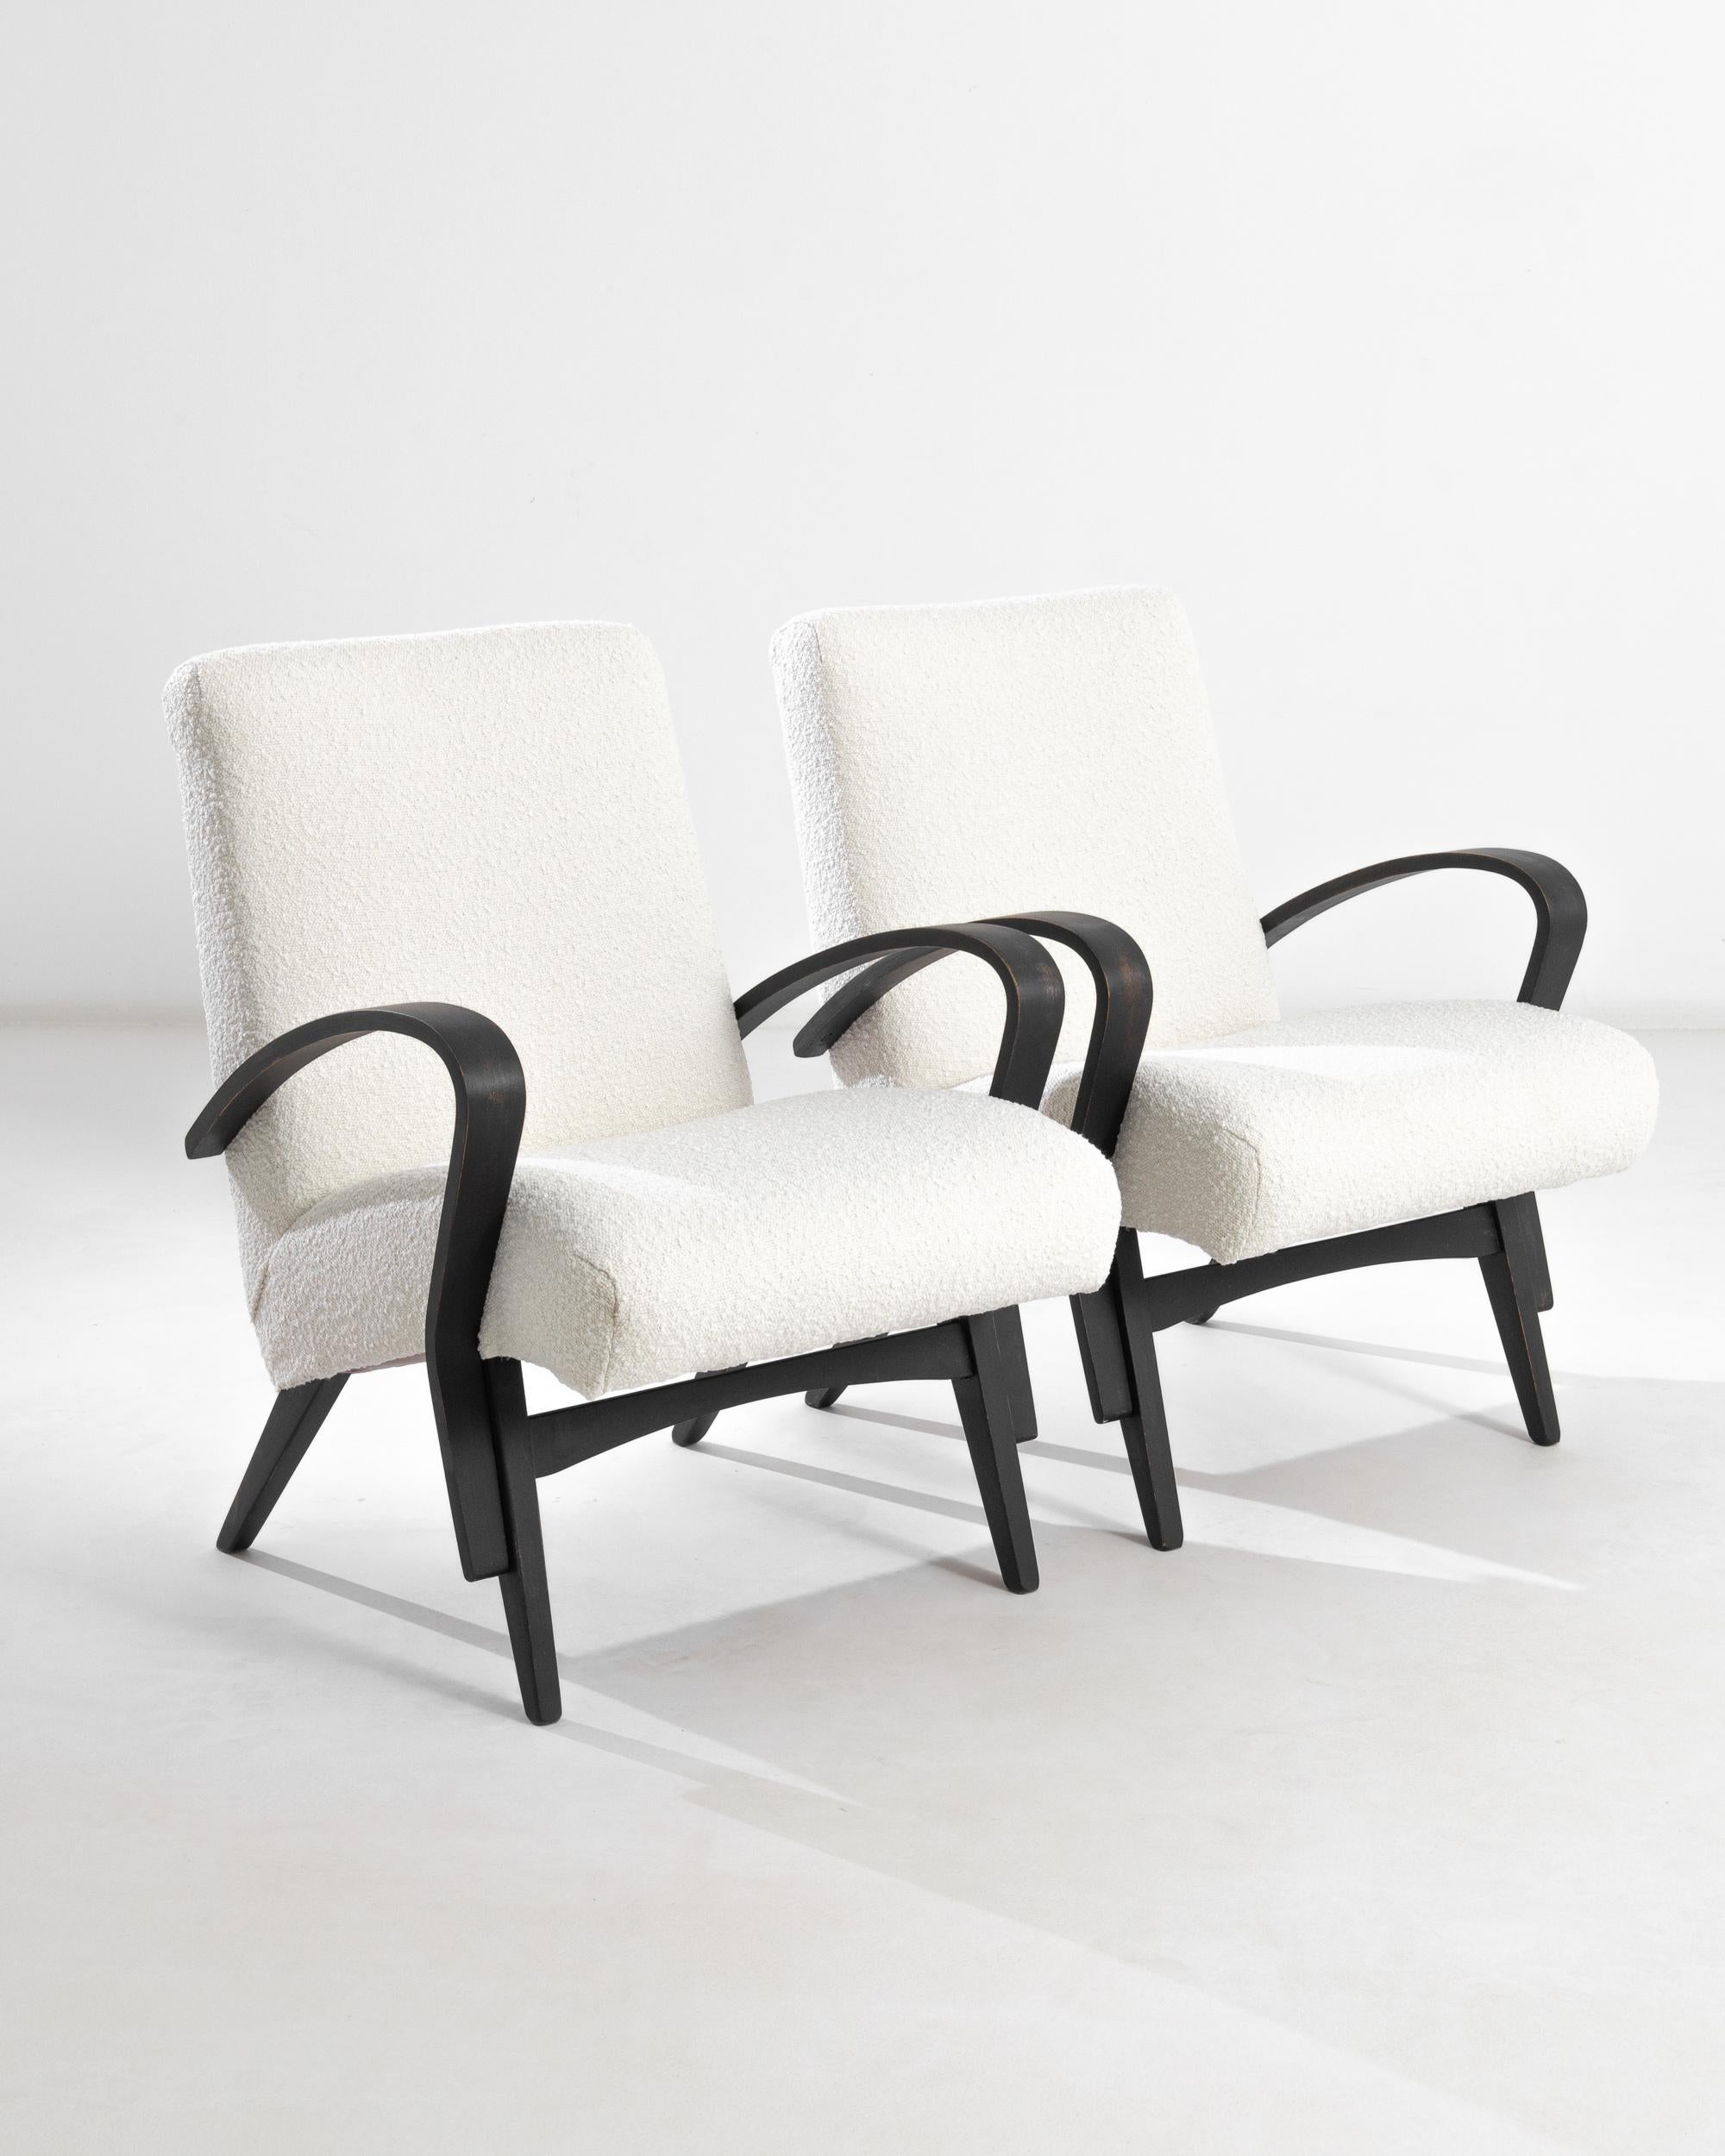 1960s Boucle Upholstered Armchairs by F. Jirák for Tatra, a Pair For Sale 1